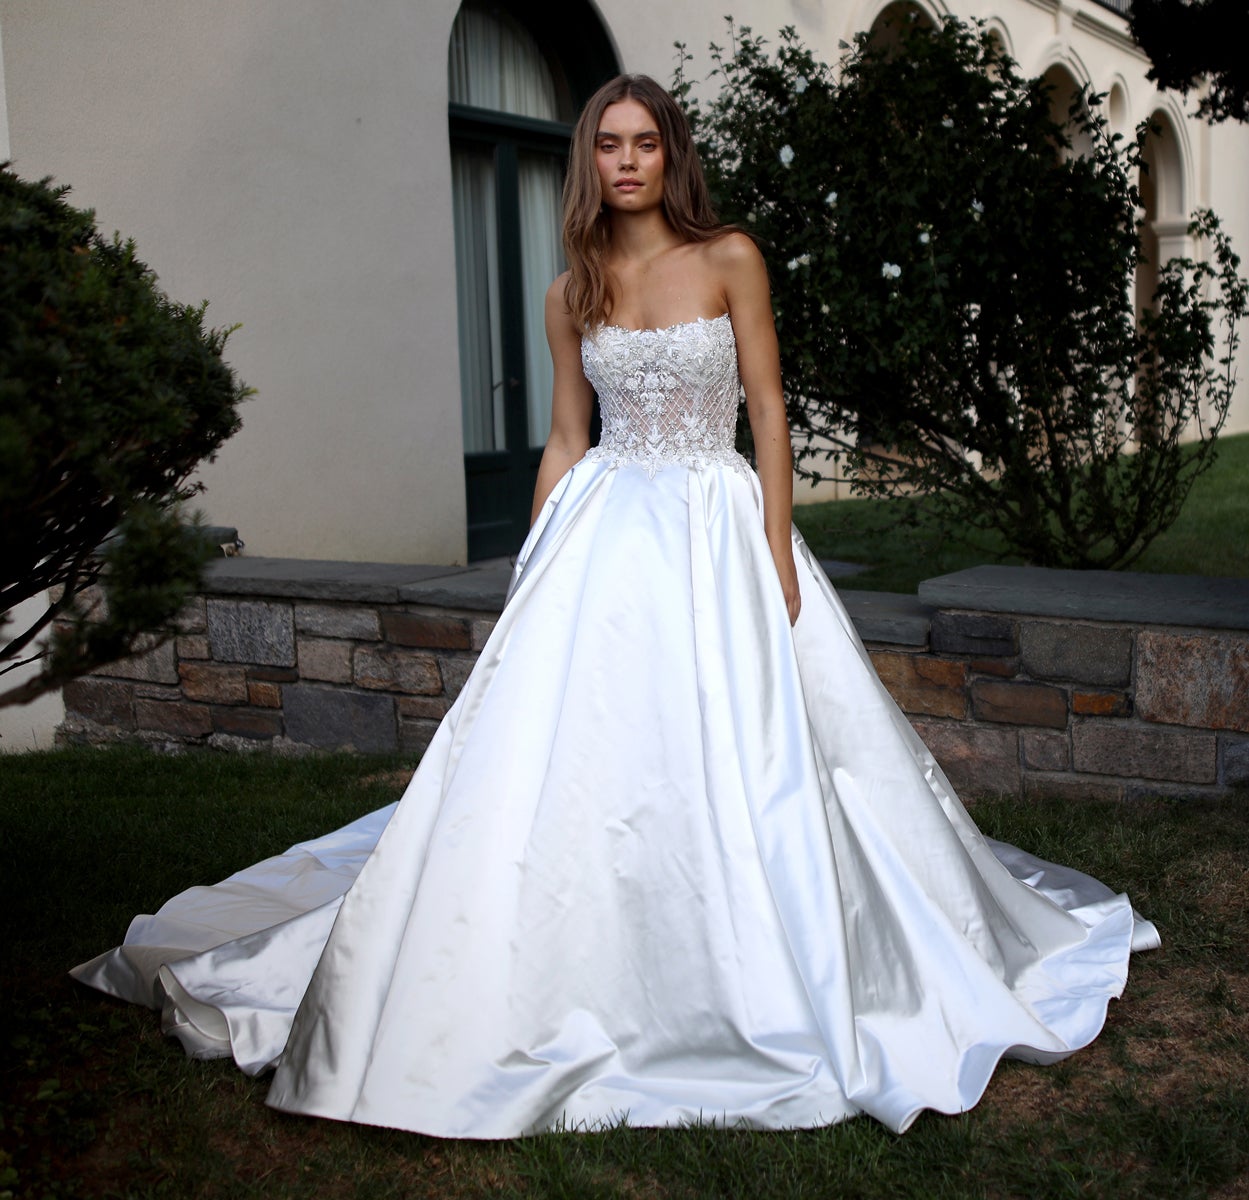 Strapless Ball Gown Wedding Dress With A Corset Bodice, Front Slit